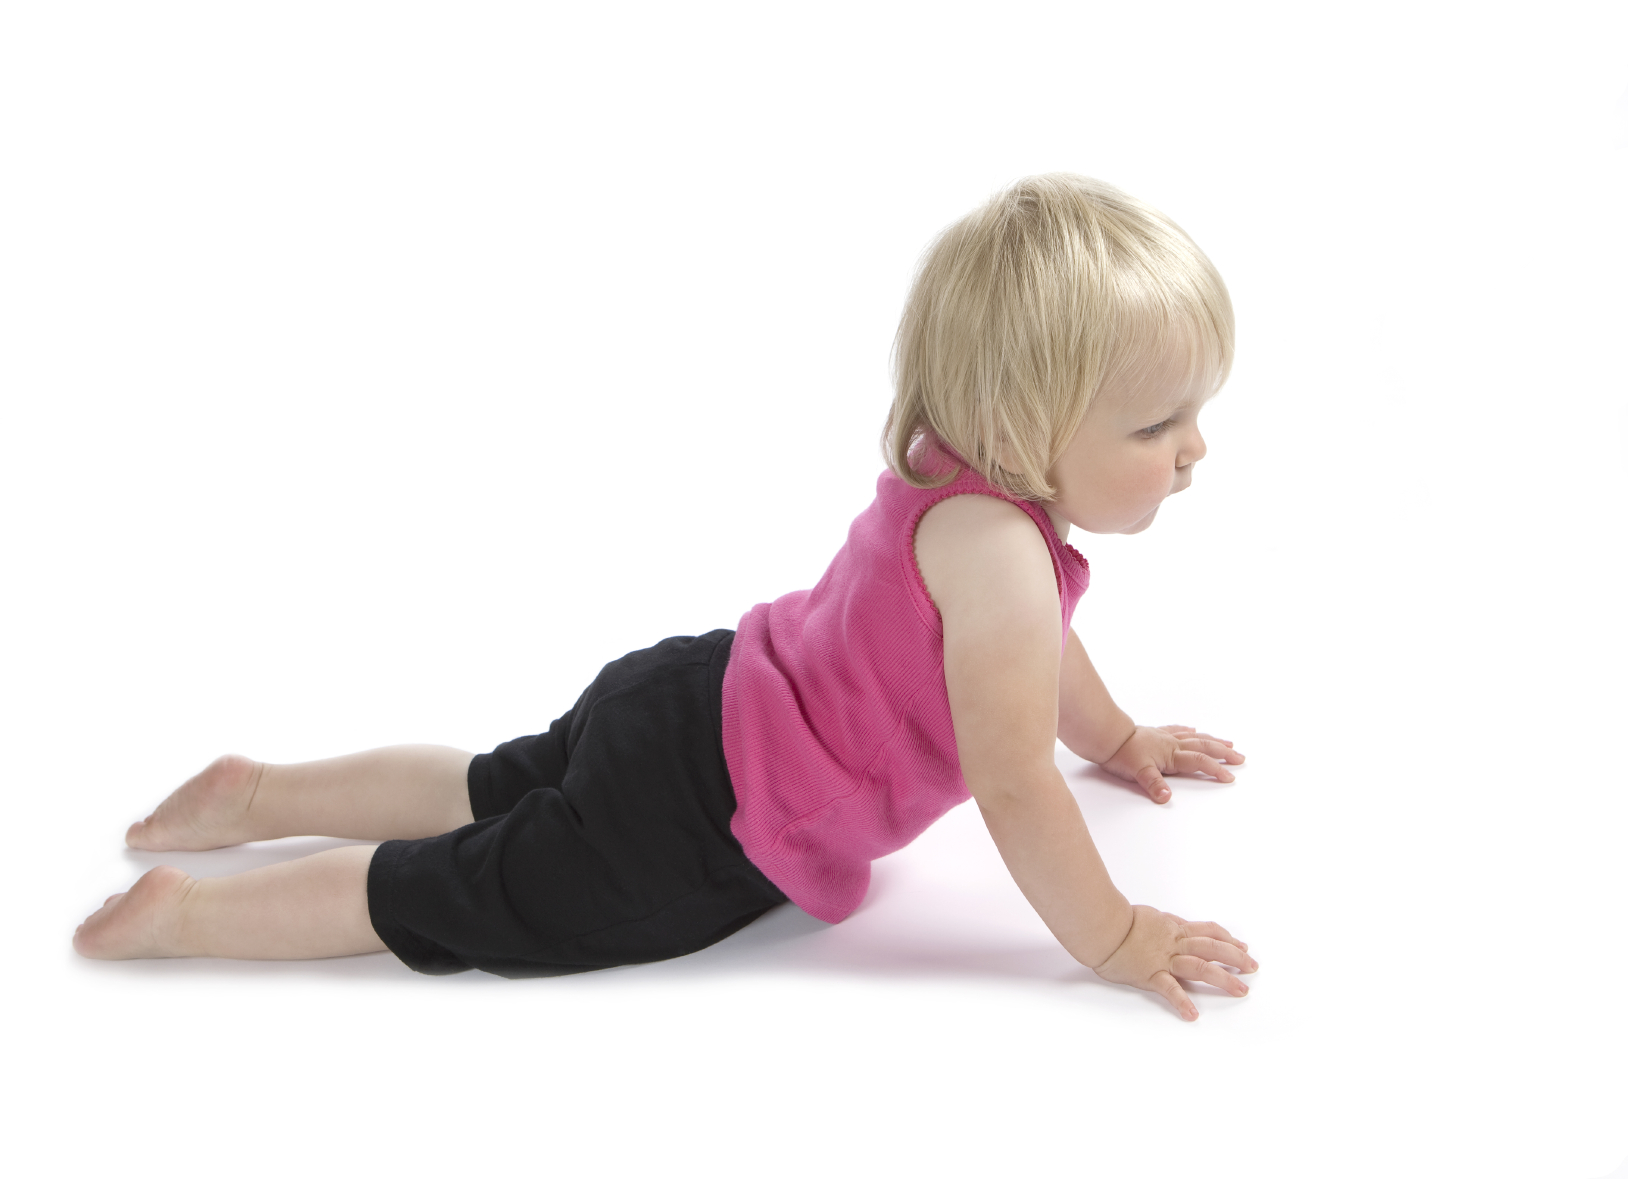 To Crawl or Not to Crawl? That is the Question.